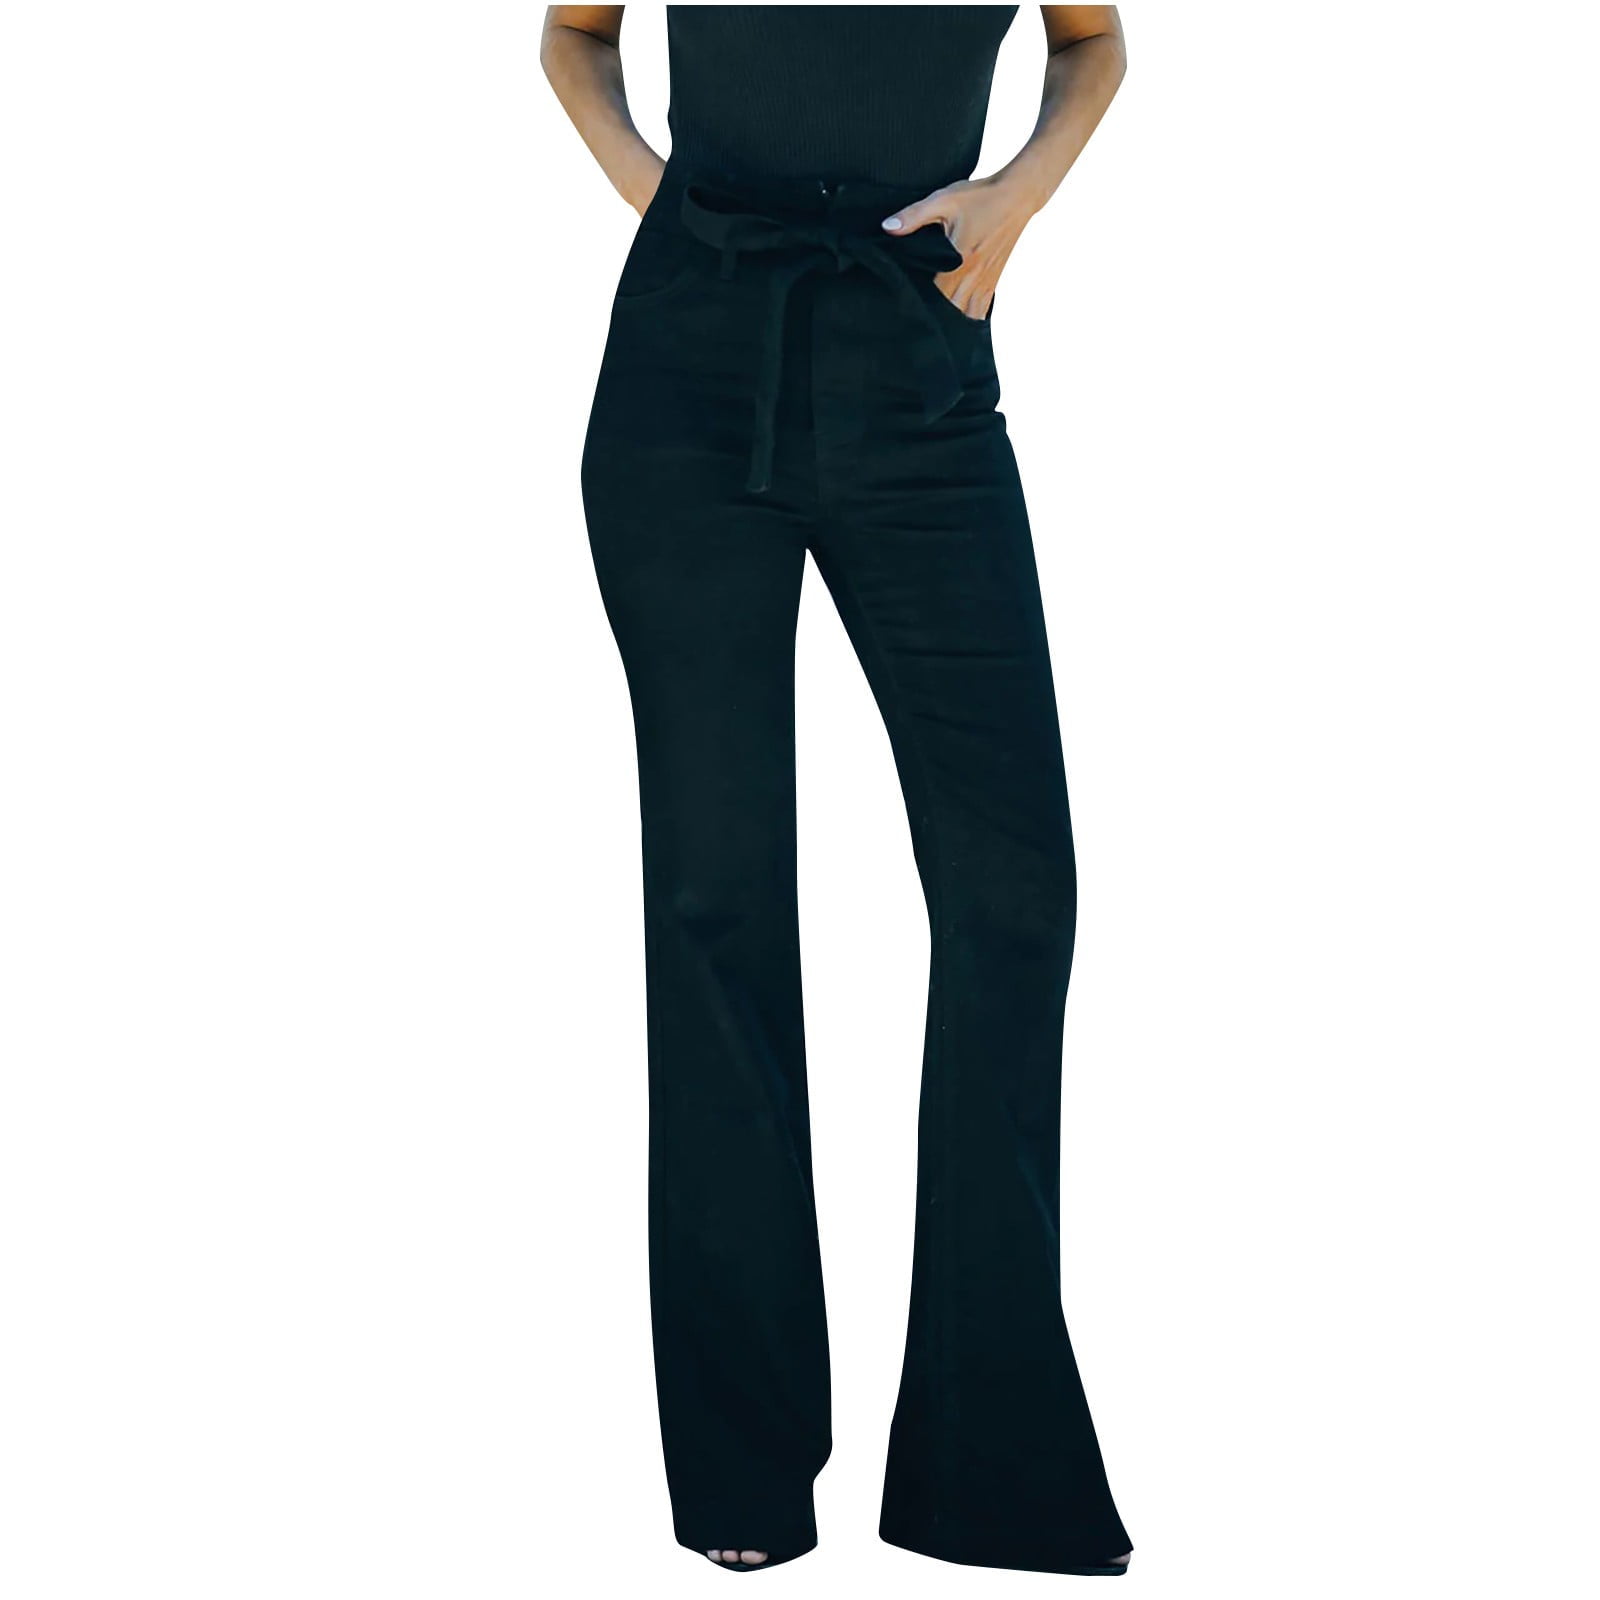 Bigersell Girls Flare Pants Full Length Ladies Spring And Fall Lace-Up Jeans  And Trousers Slim Fit Slim Women Ladies Jean Leggings 